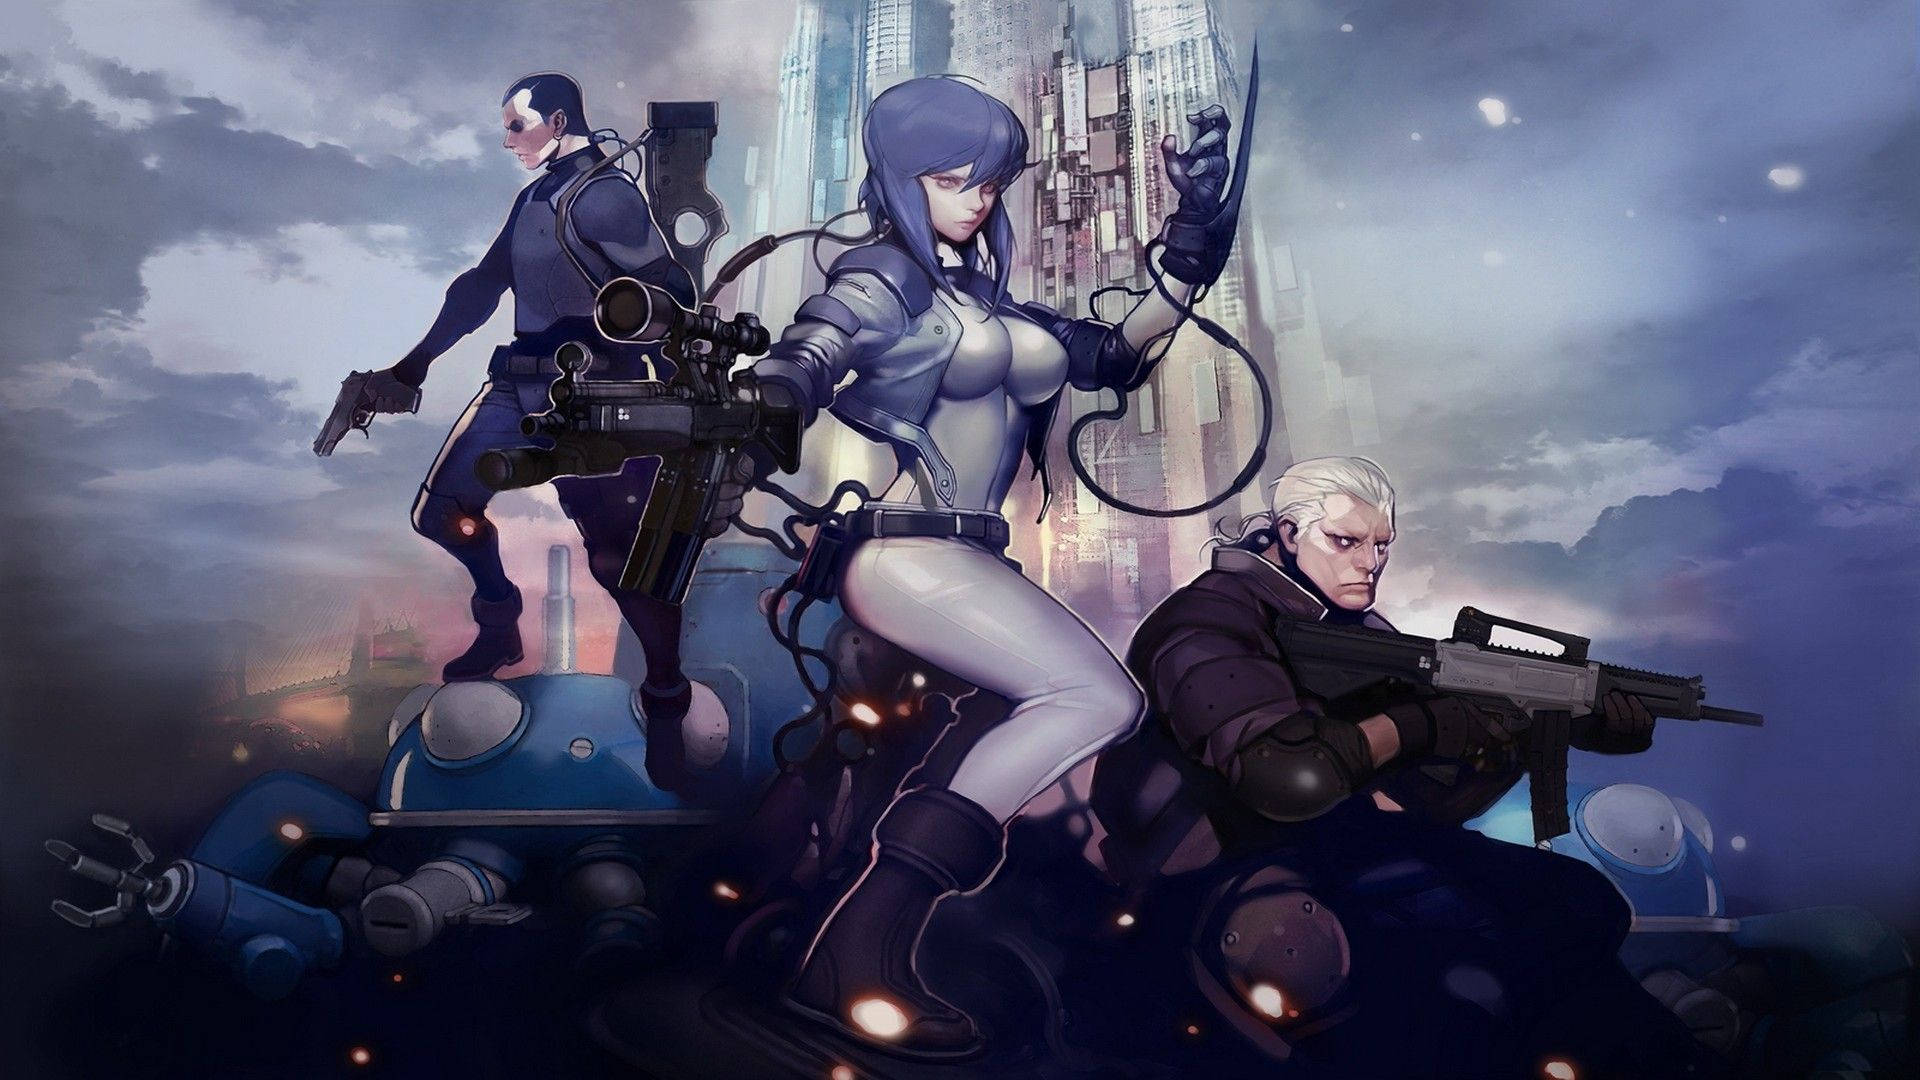 Get AmazingGhost In The Shell Wallpaper